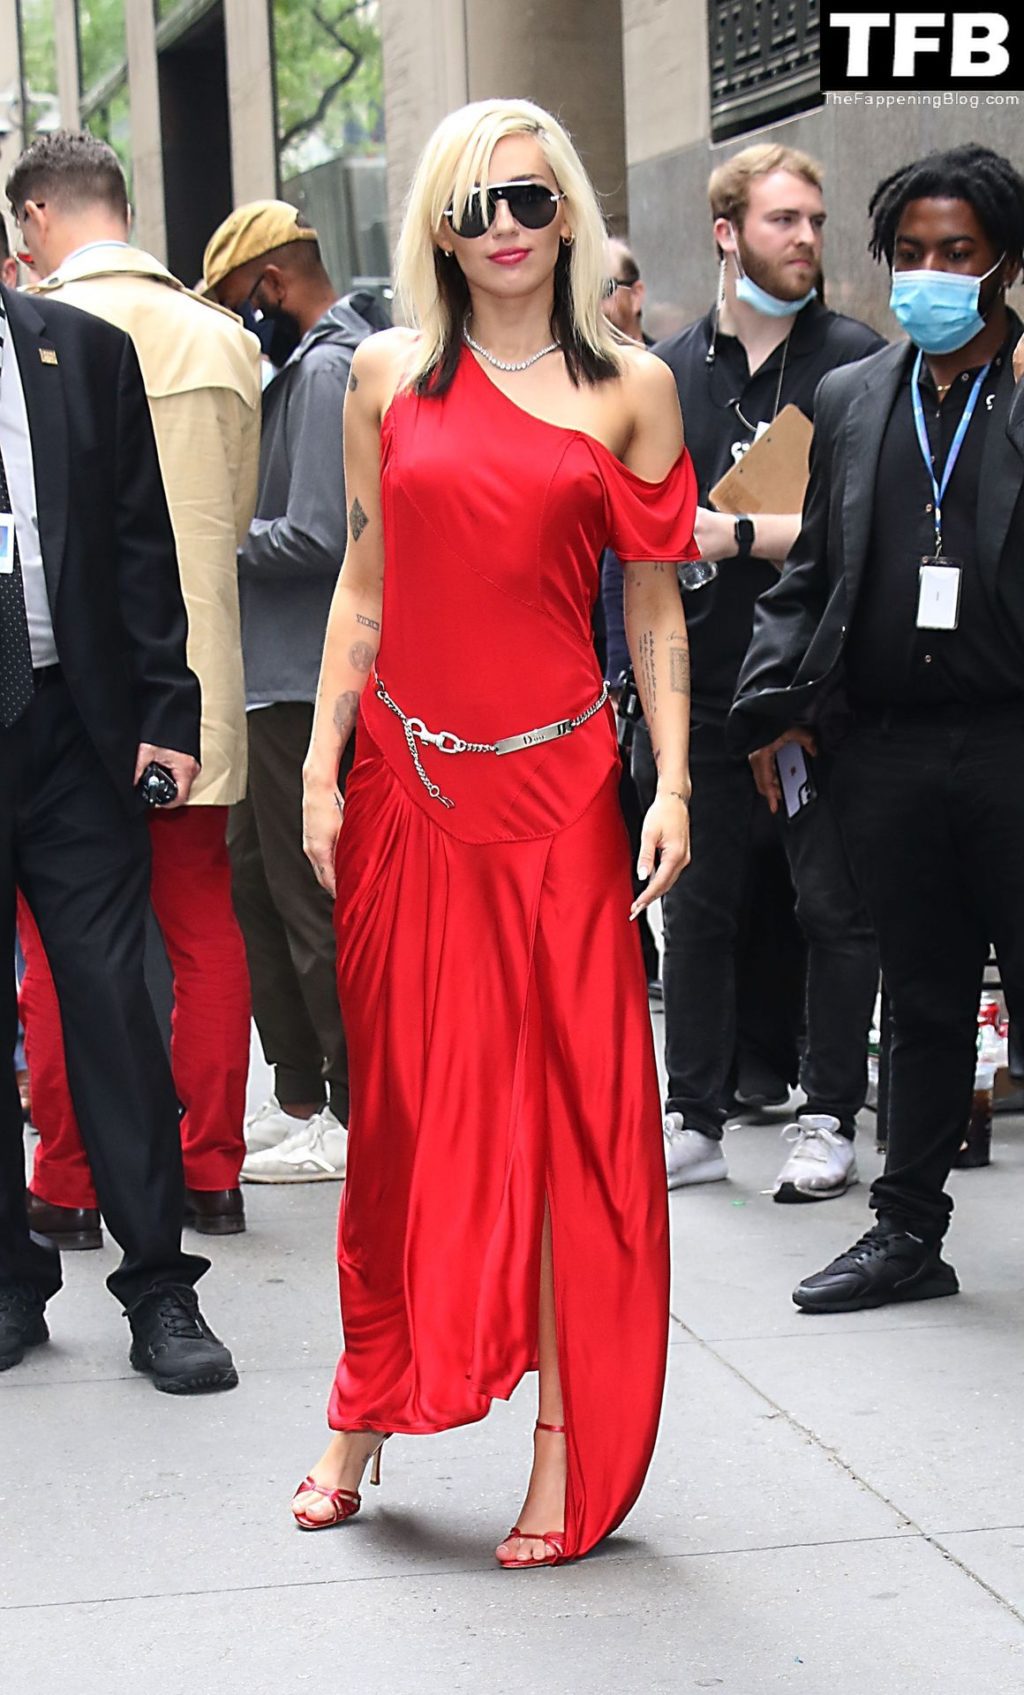 Miley Cyrus Looks Hot in Red as She Attends the 2022 NBCUniversal Upfront in New York (5 Photos)